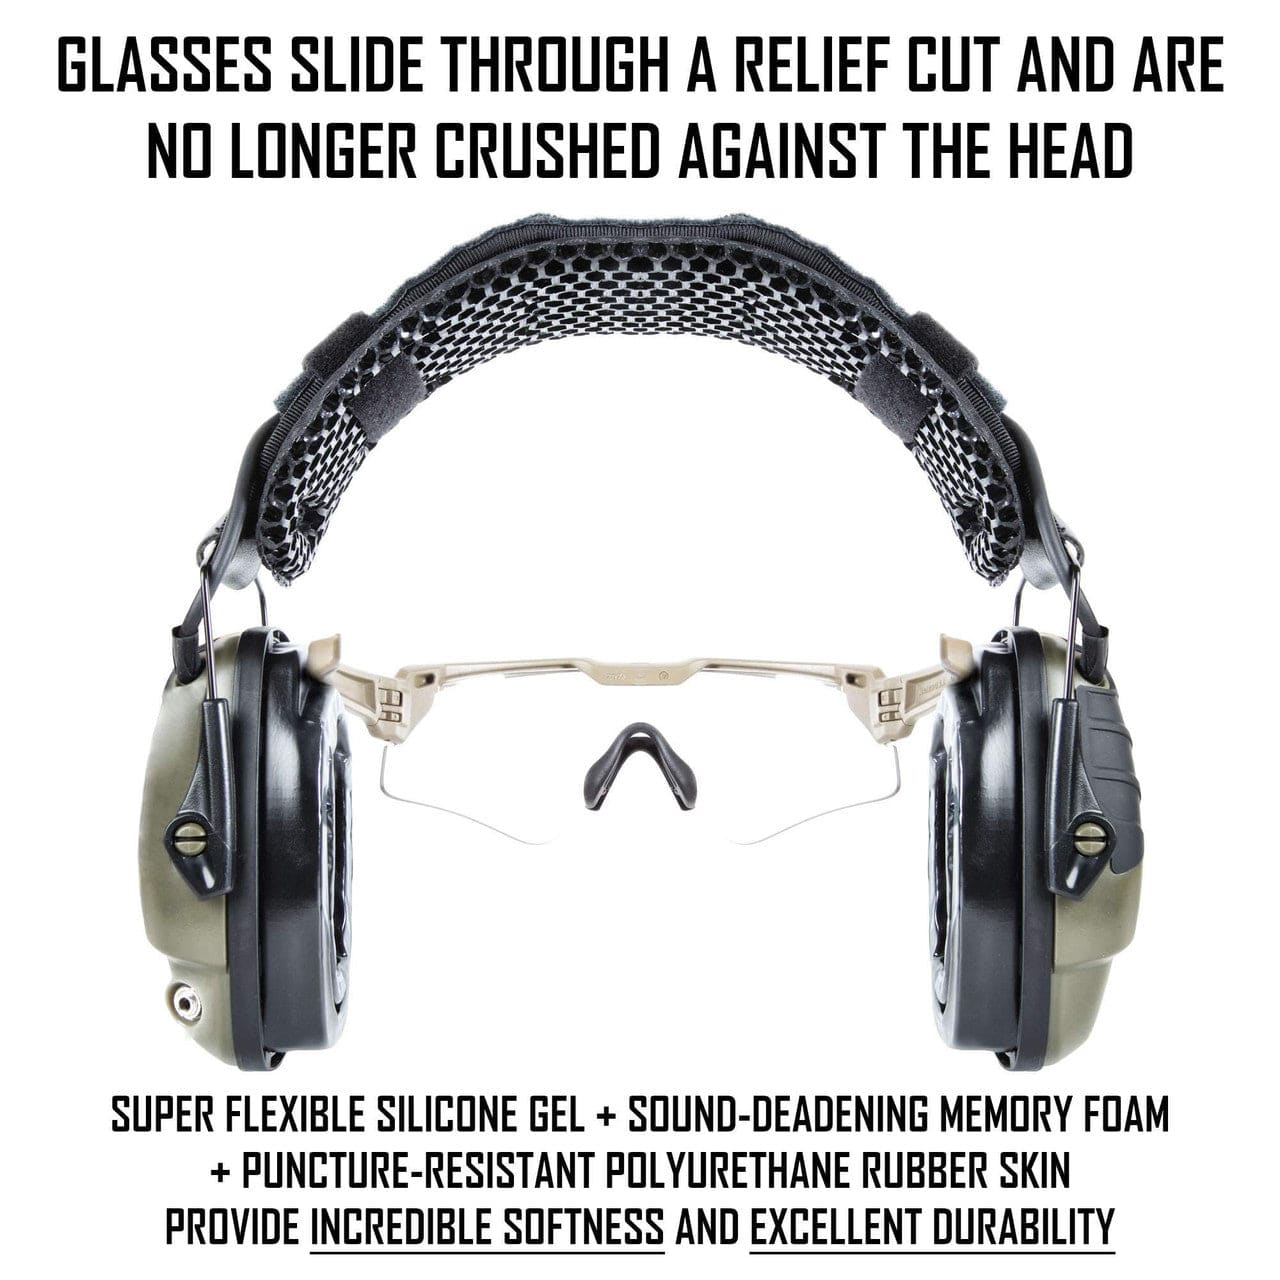 Your eyewear temples slide through Sightlines's patented relief cut and no longer crushed against your head 